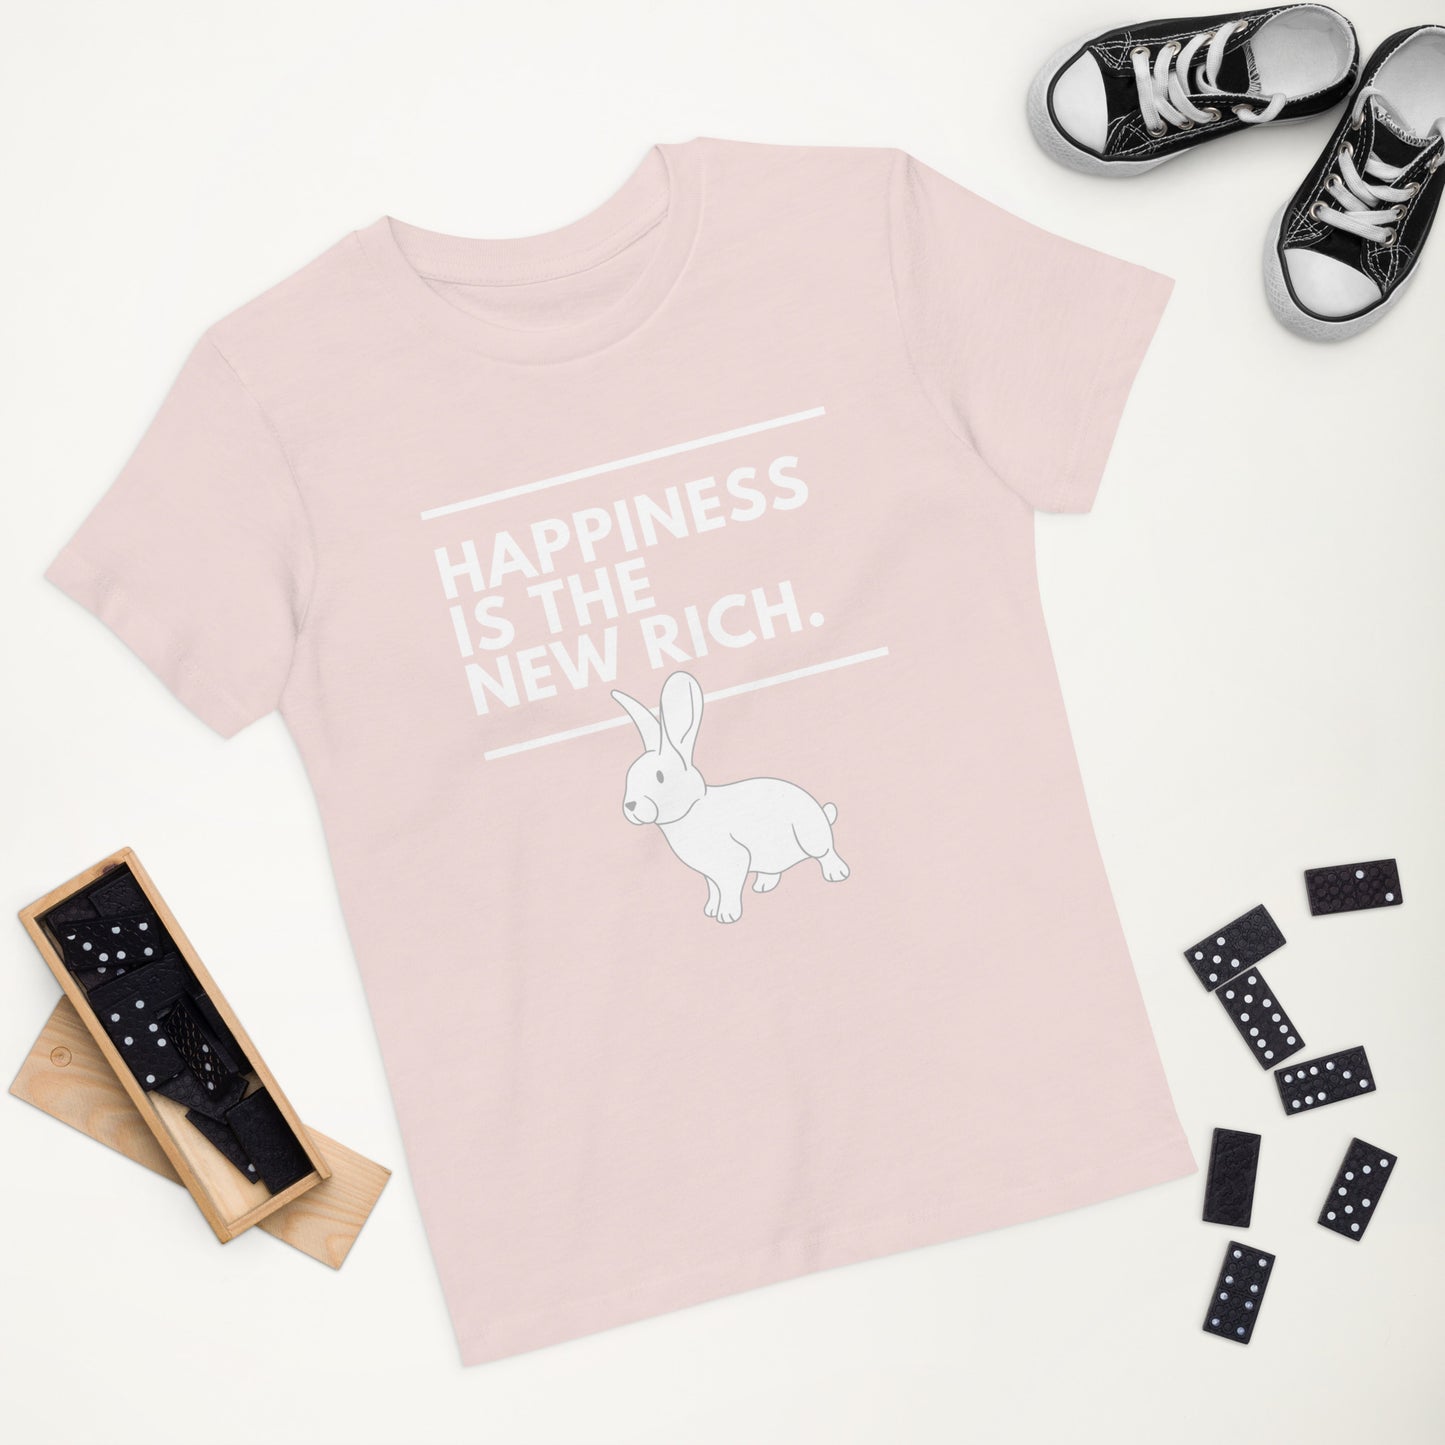 Happiness Is The New Rich Organic Cotton Kids T-shirt